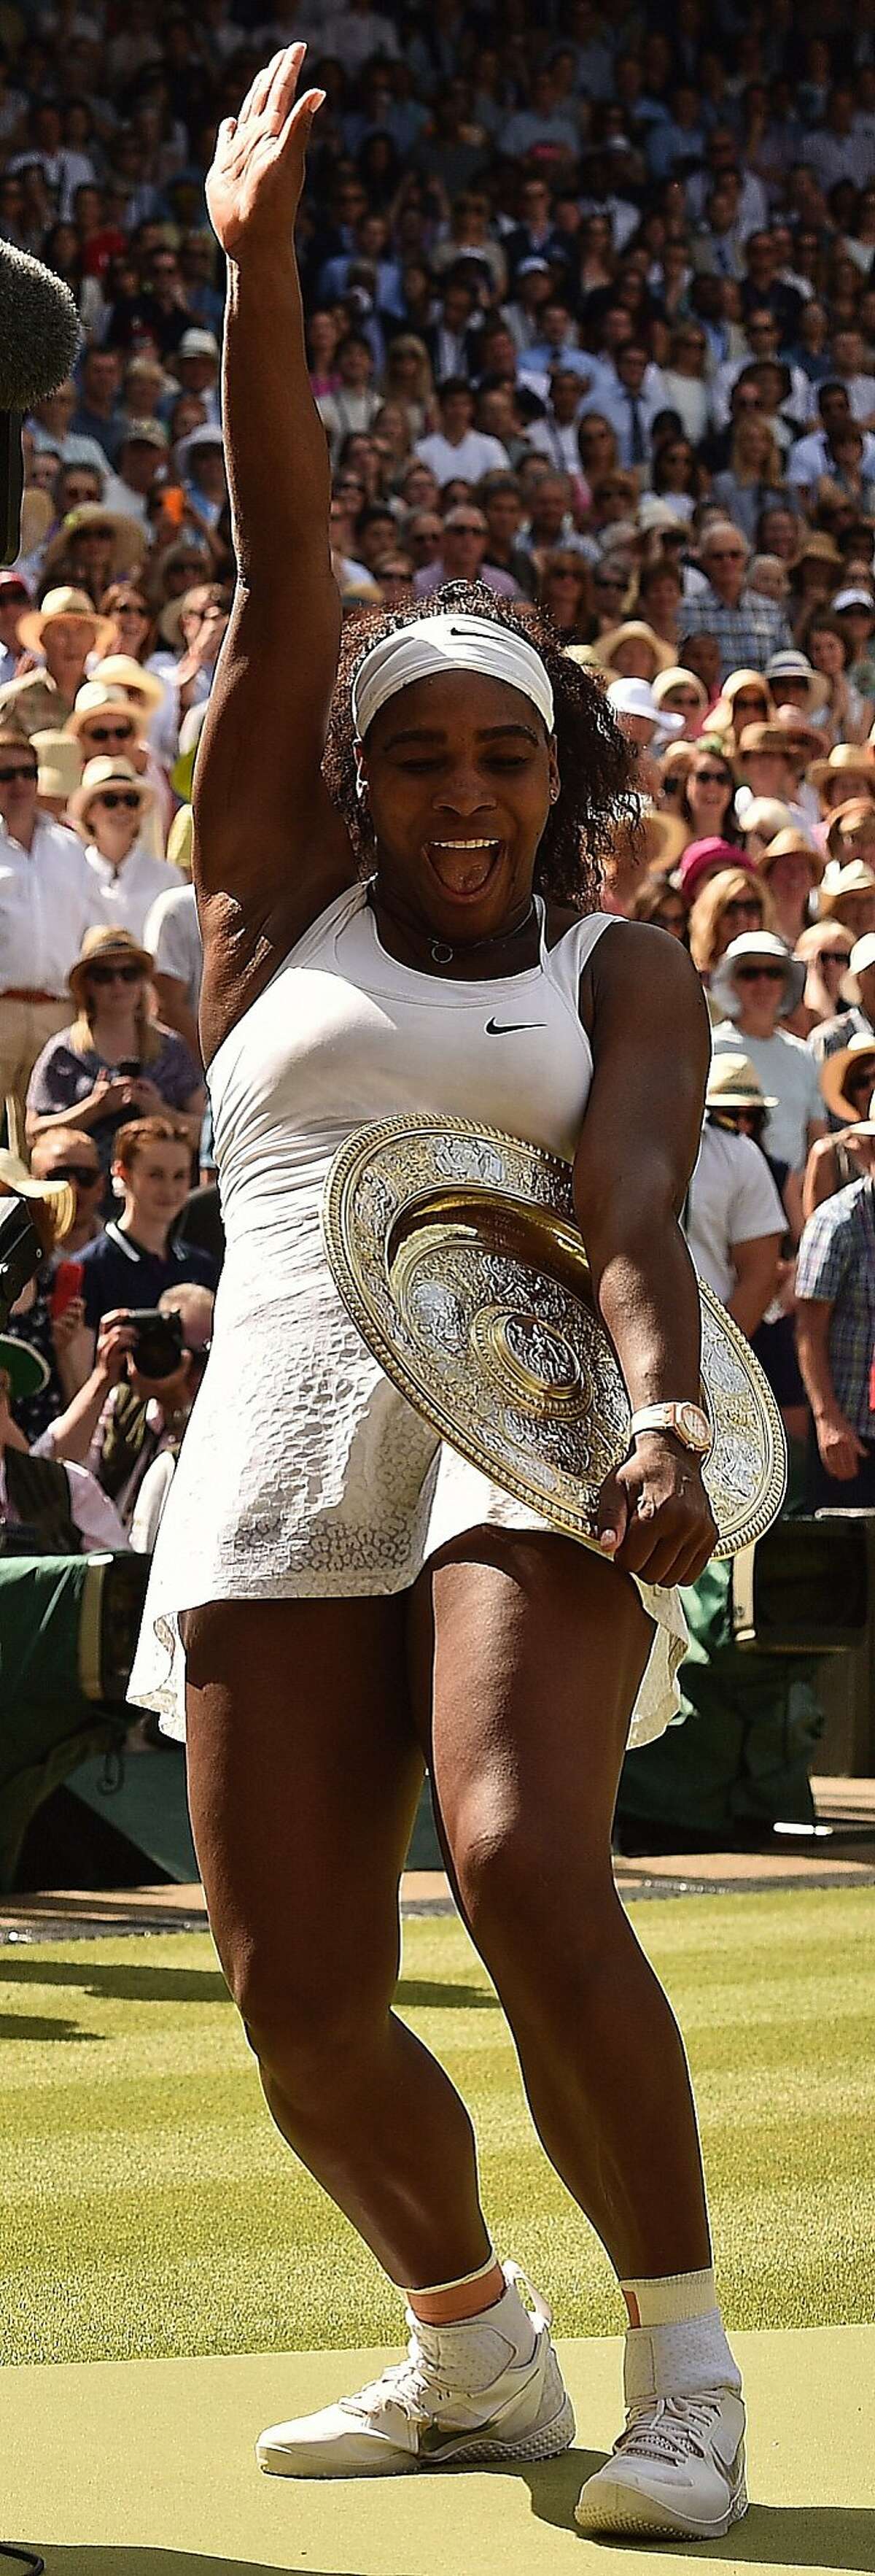 TOPSHOTS US player Serena Williams celebrates with the winner's trophy, the Venus Rosewater Dish, after her women's singles final victory over Spain's Garbine Muguruza on day twelve of the 2015 Wimbledon Championships at The All England Tennis Club in Wimbledon, southwest London, on July 11, 2015. Williams won 6-4, 6-4. RESTRICTED TO EDITORIAL USE -- AFP PHOTO / LEON NEALLEON NEAL/AFP/Getty Images